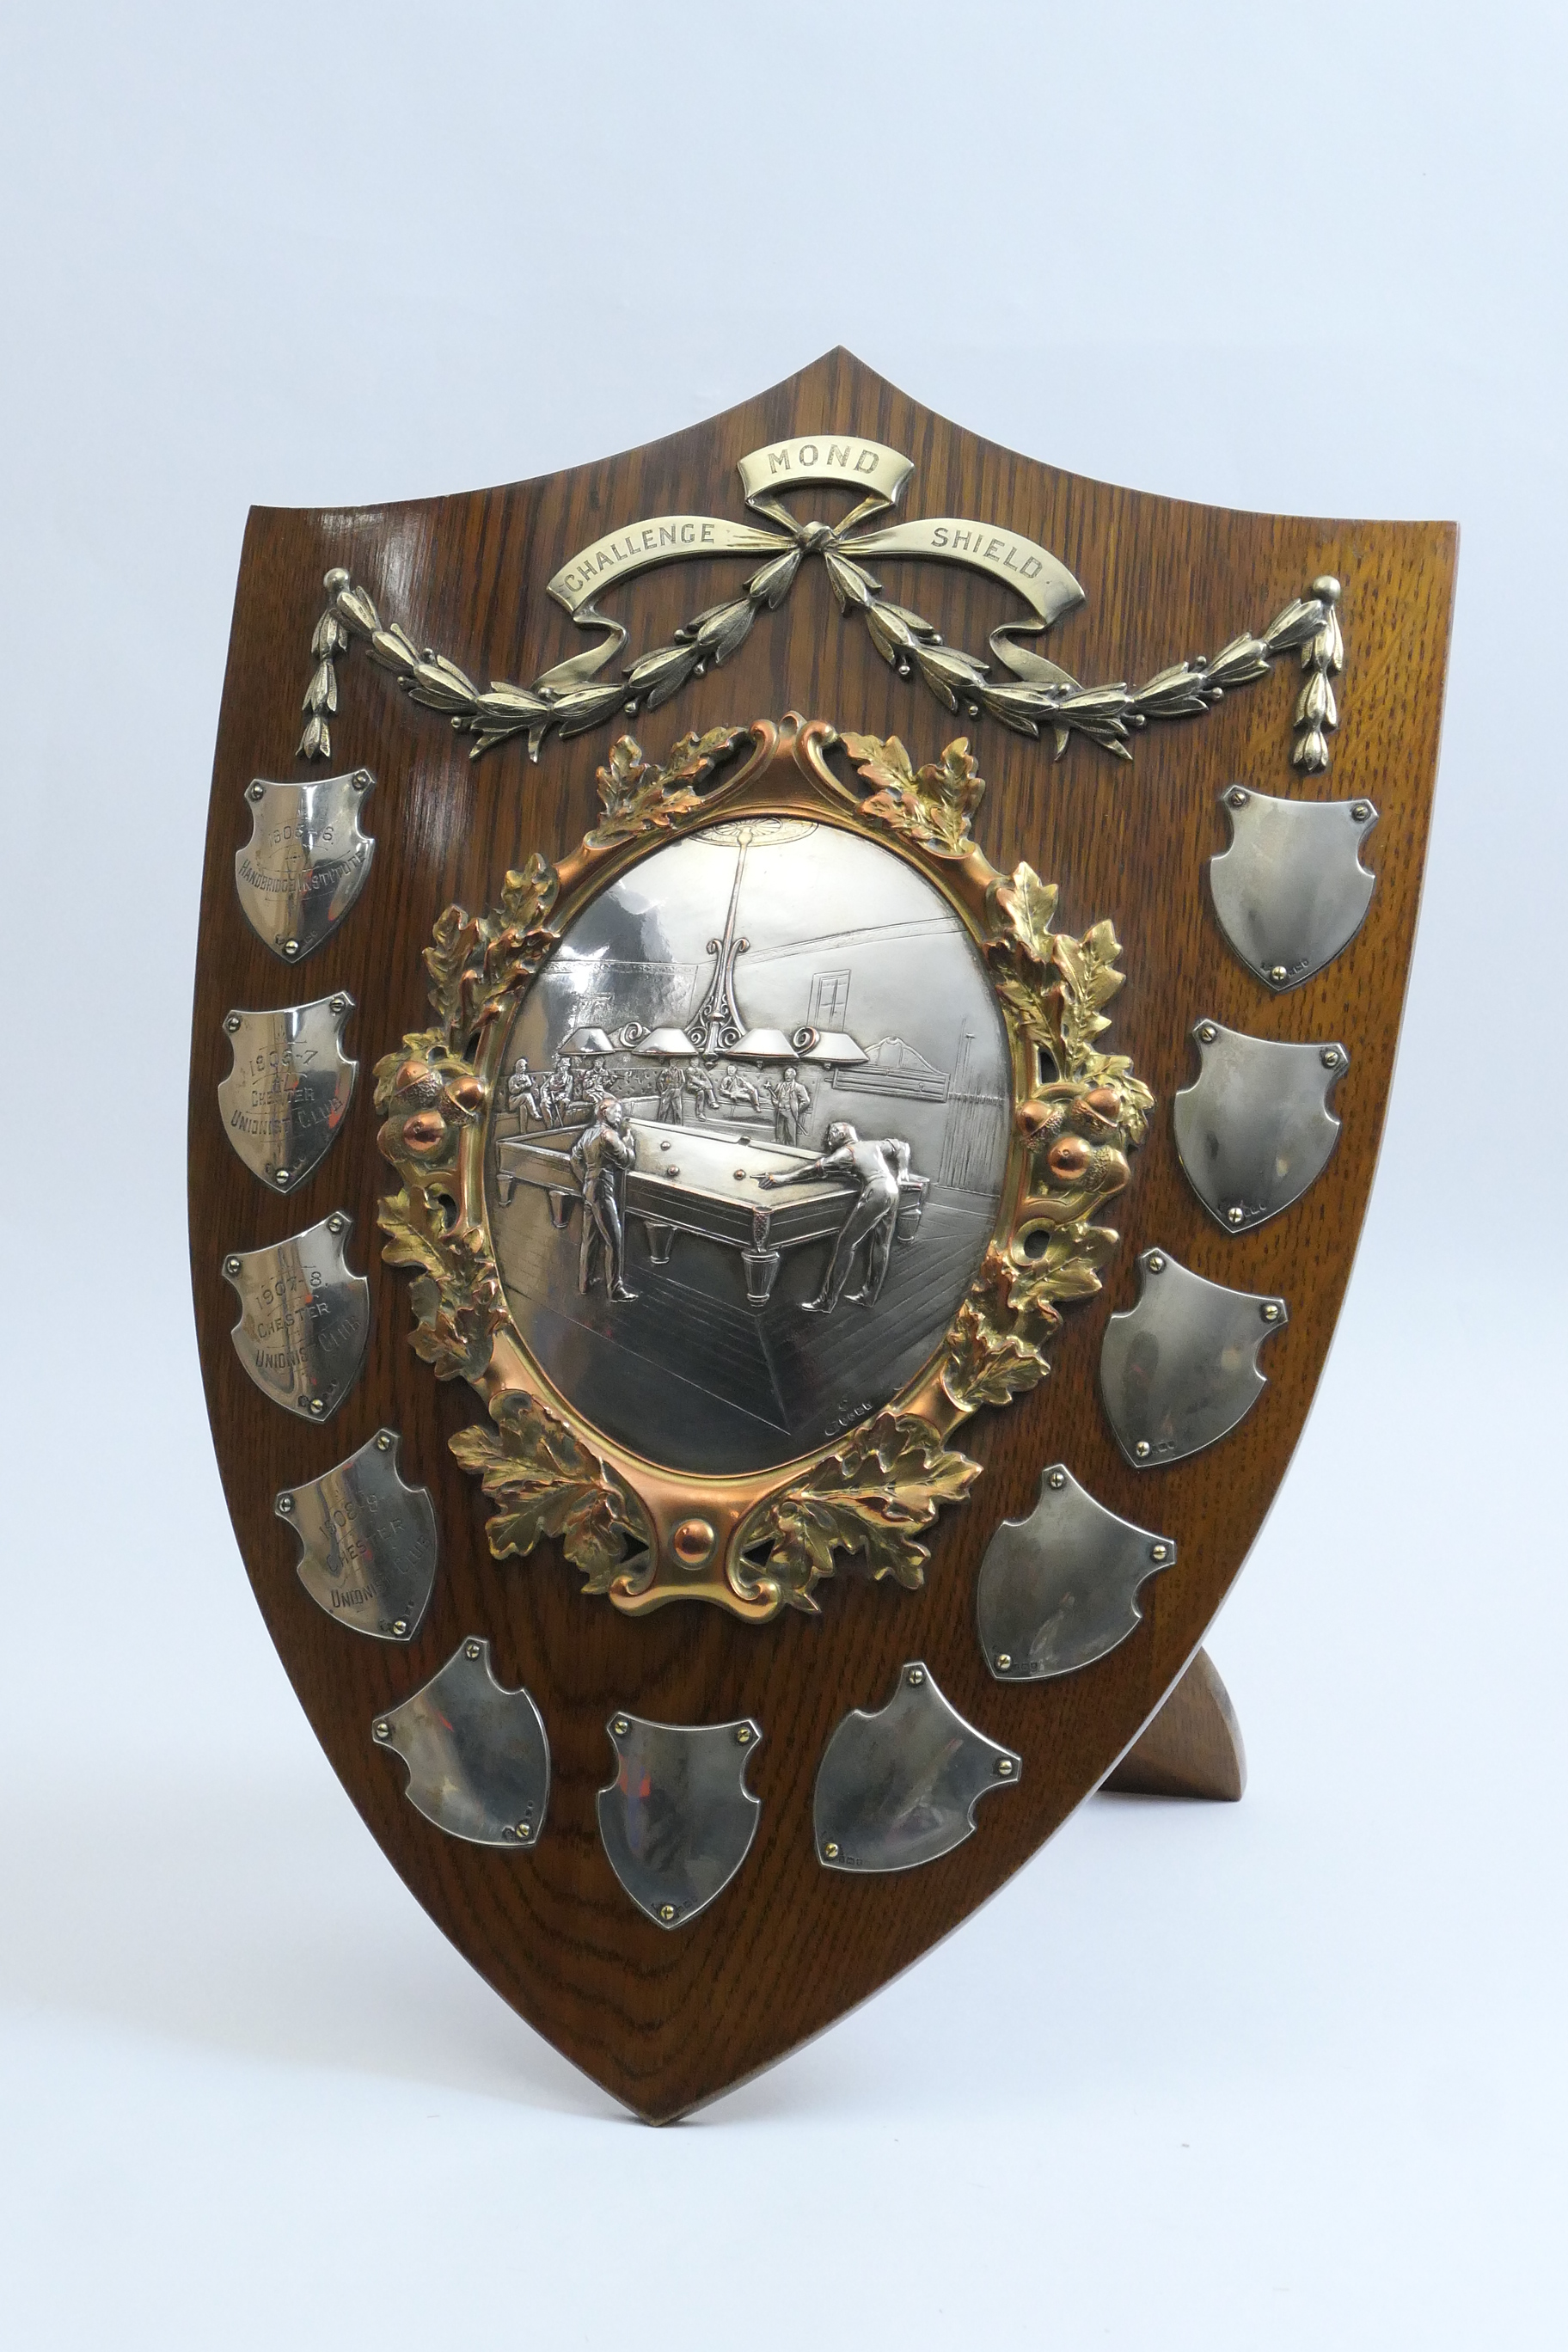 'Le Mond Challenge Shield for Billiards', the oak shield centred with a silver plated bas-relief